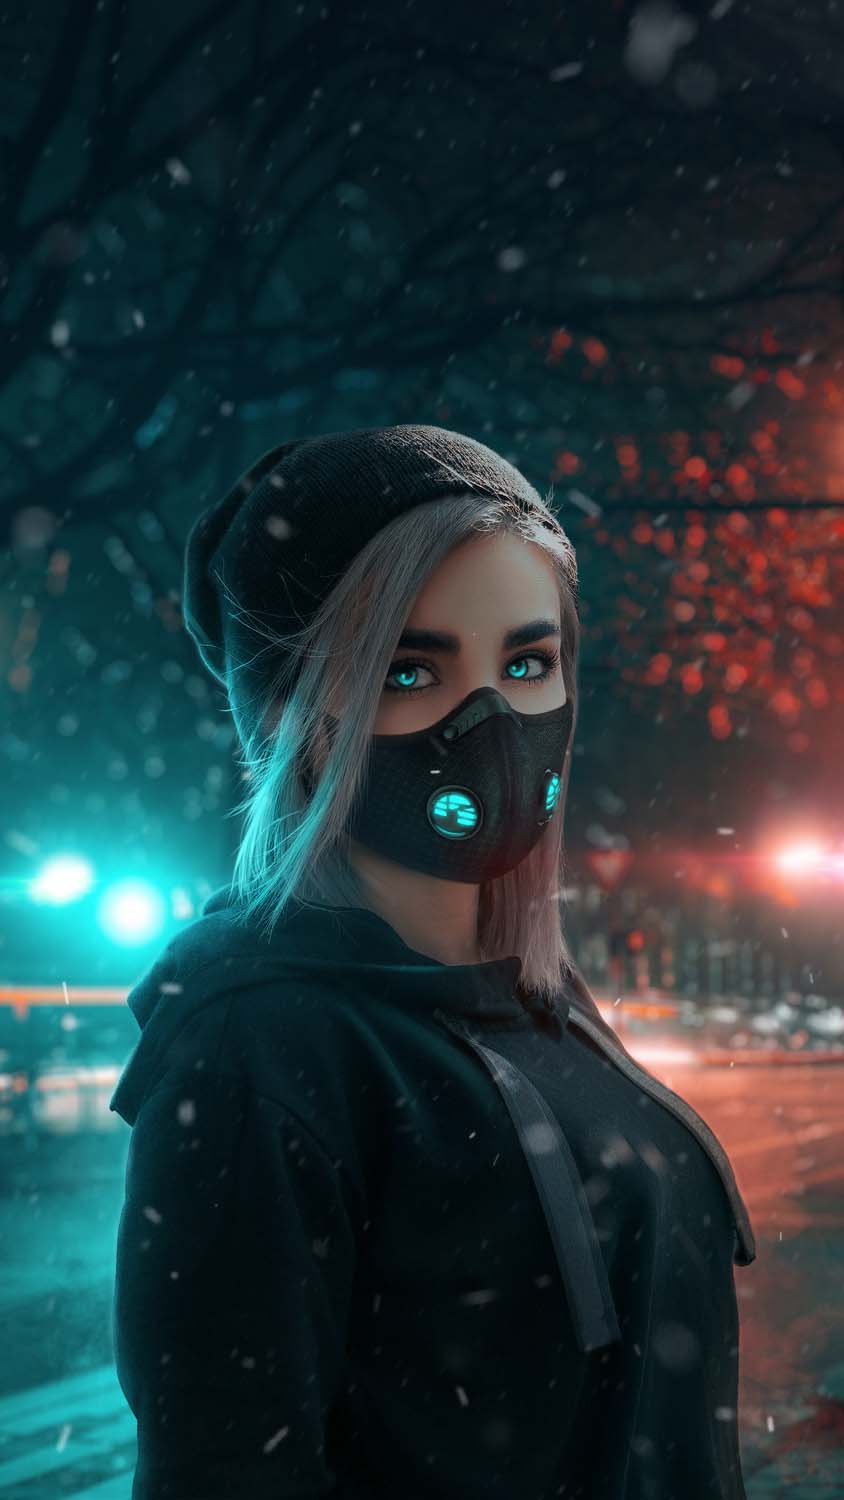 Masked Girl in Snow iPhone Wallpaper HD